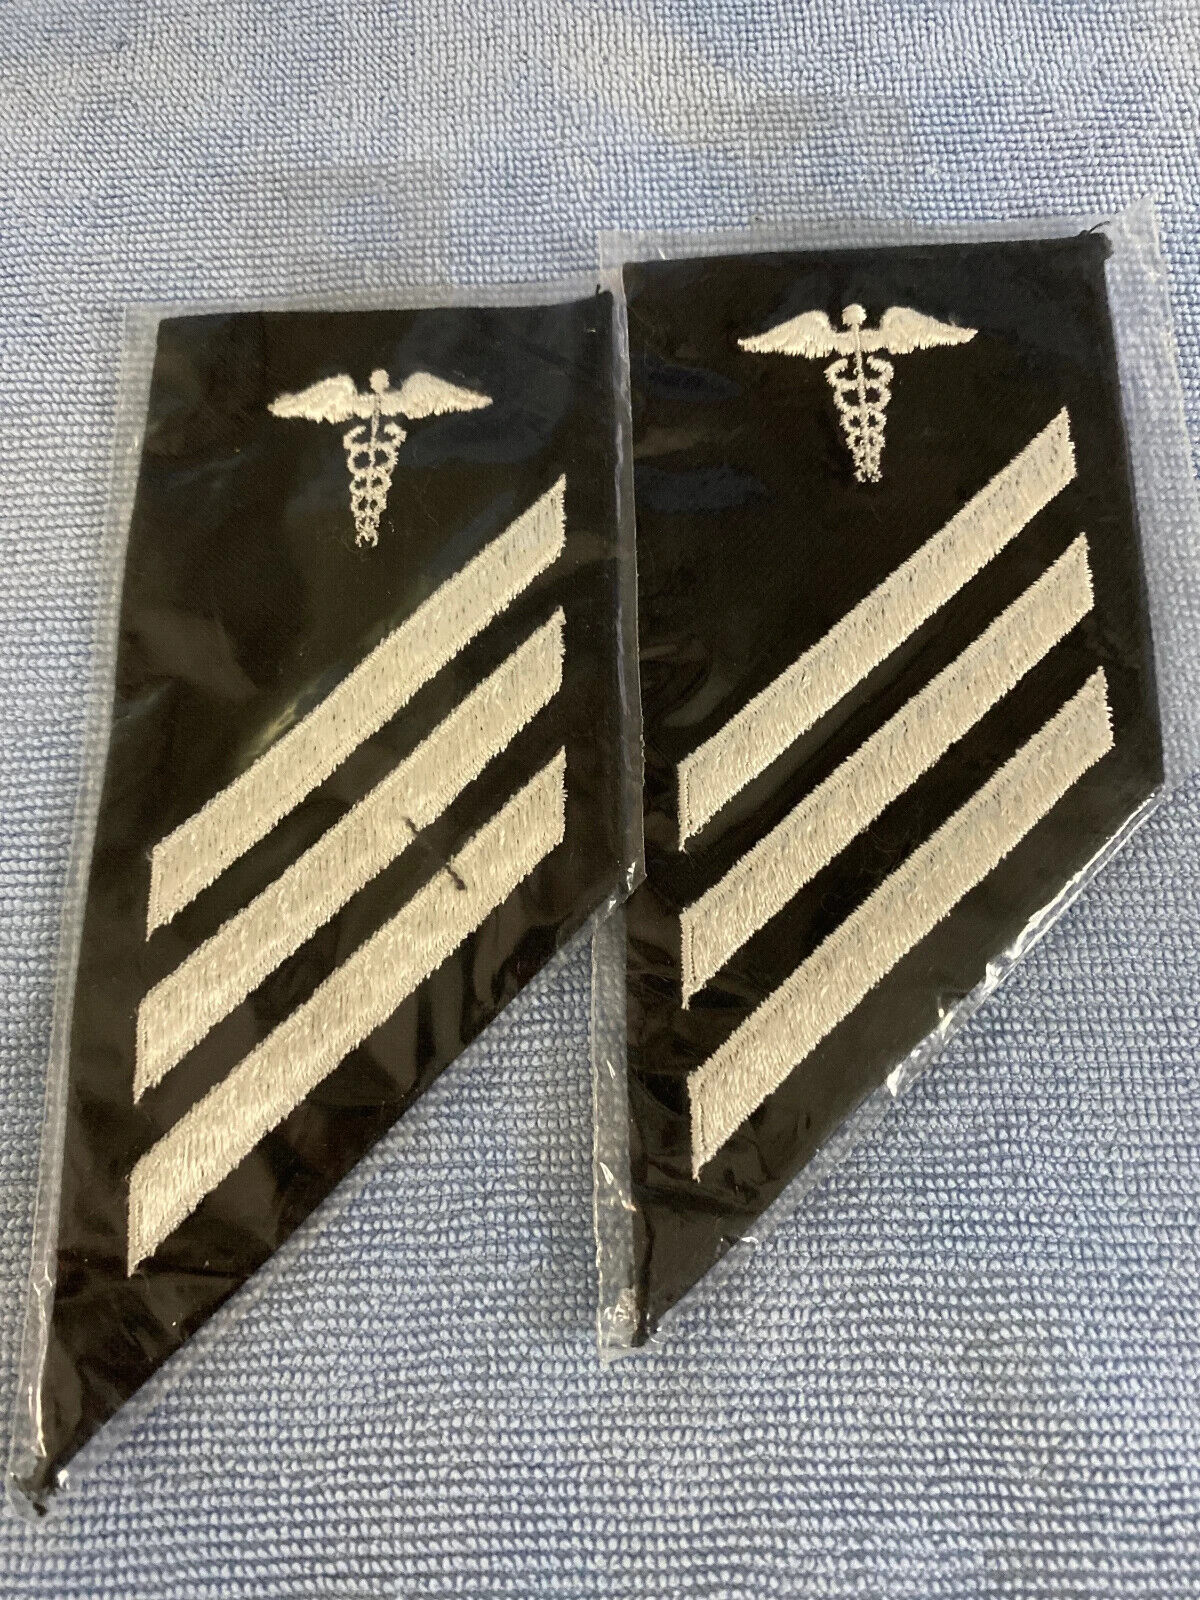 Pair USN Navy Medical SERVICE STRIPES Blue / White 3 Bars=12 years Sleeve Patch